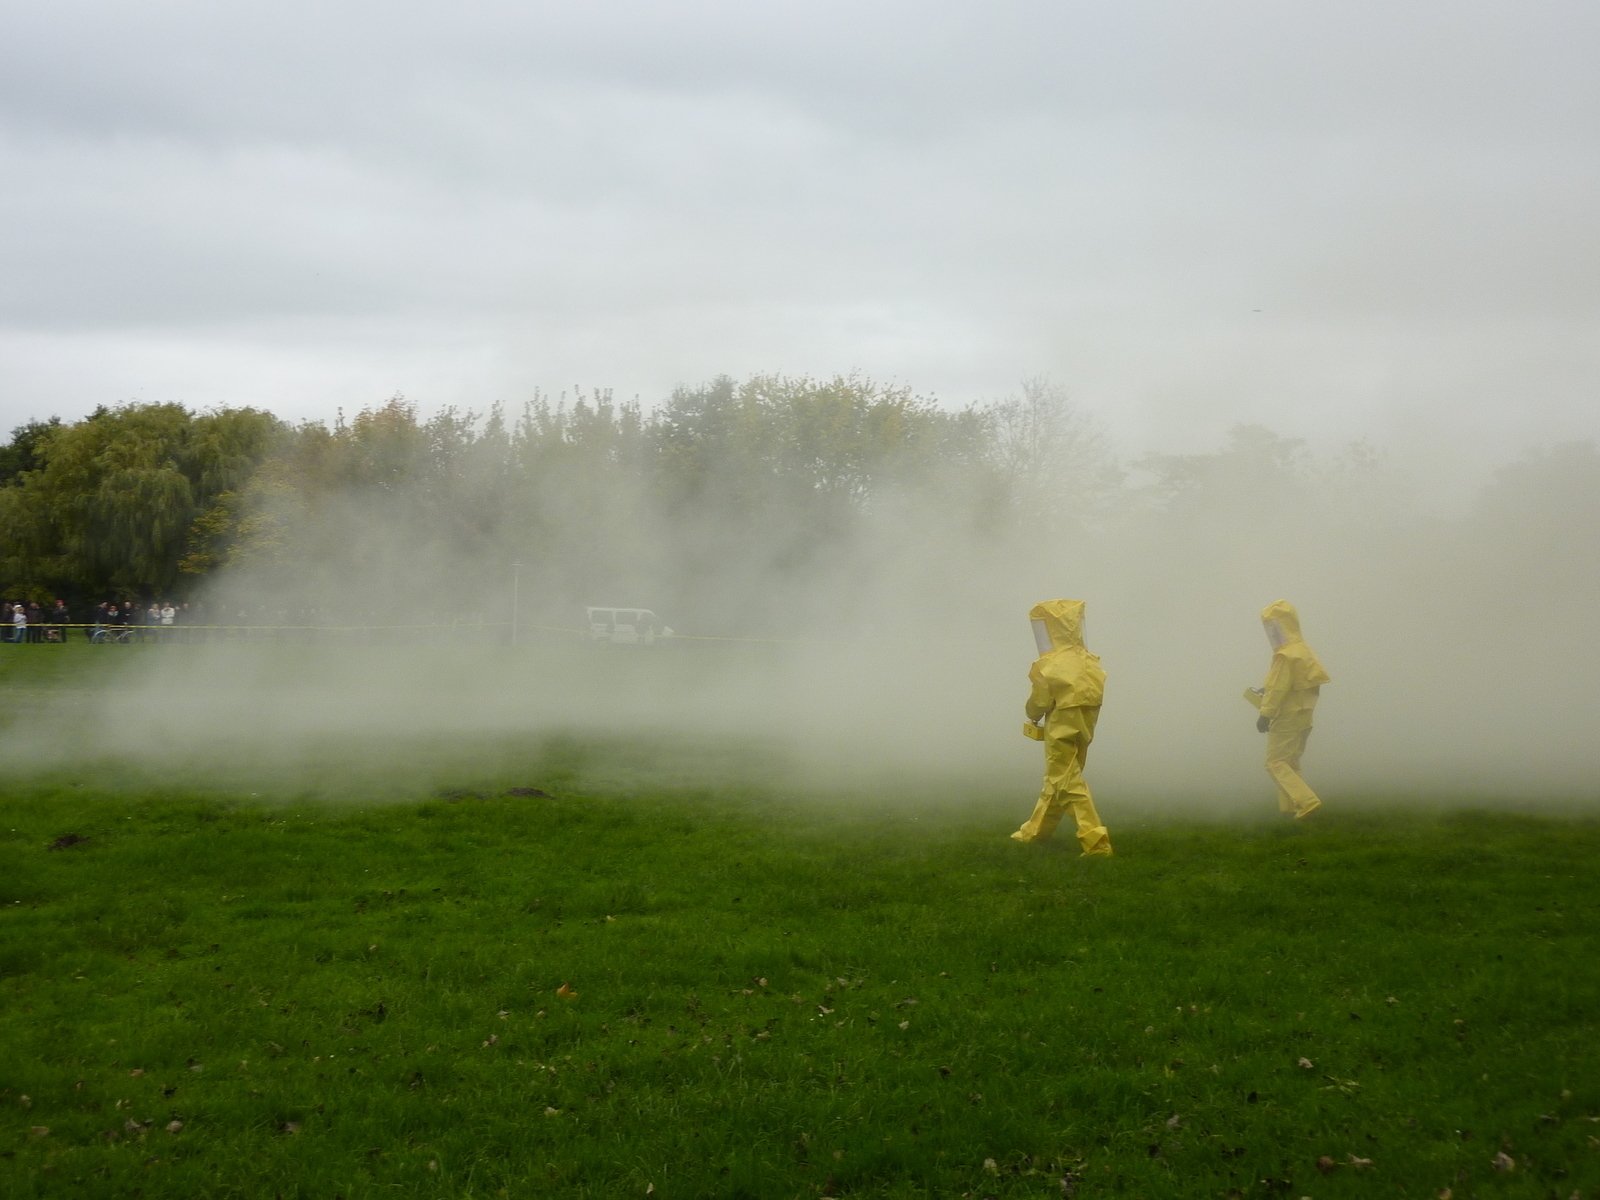 Critical Art Ensemble. Germany performing Radiation Burn: A Temporary Monument to Public Safety, 2010.